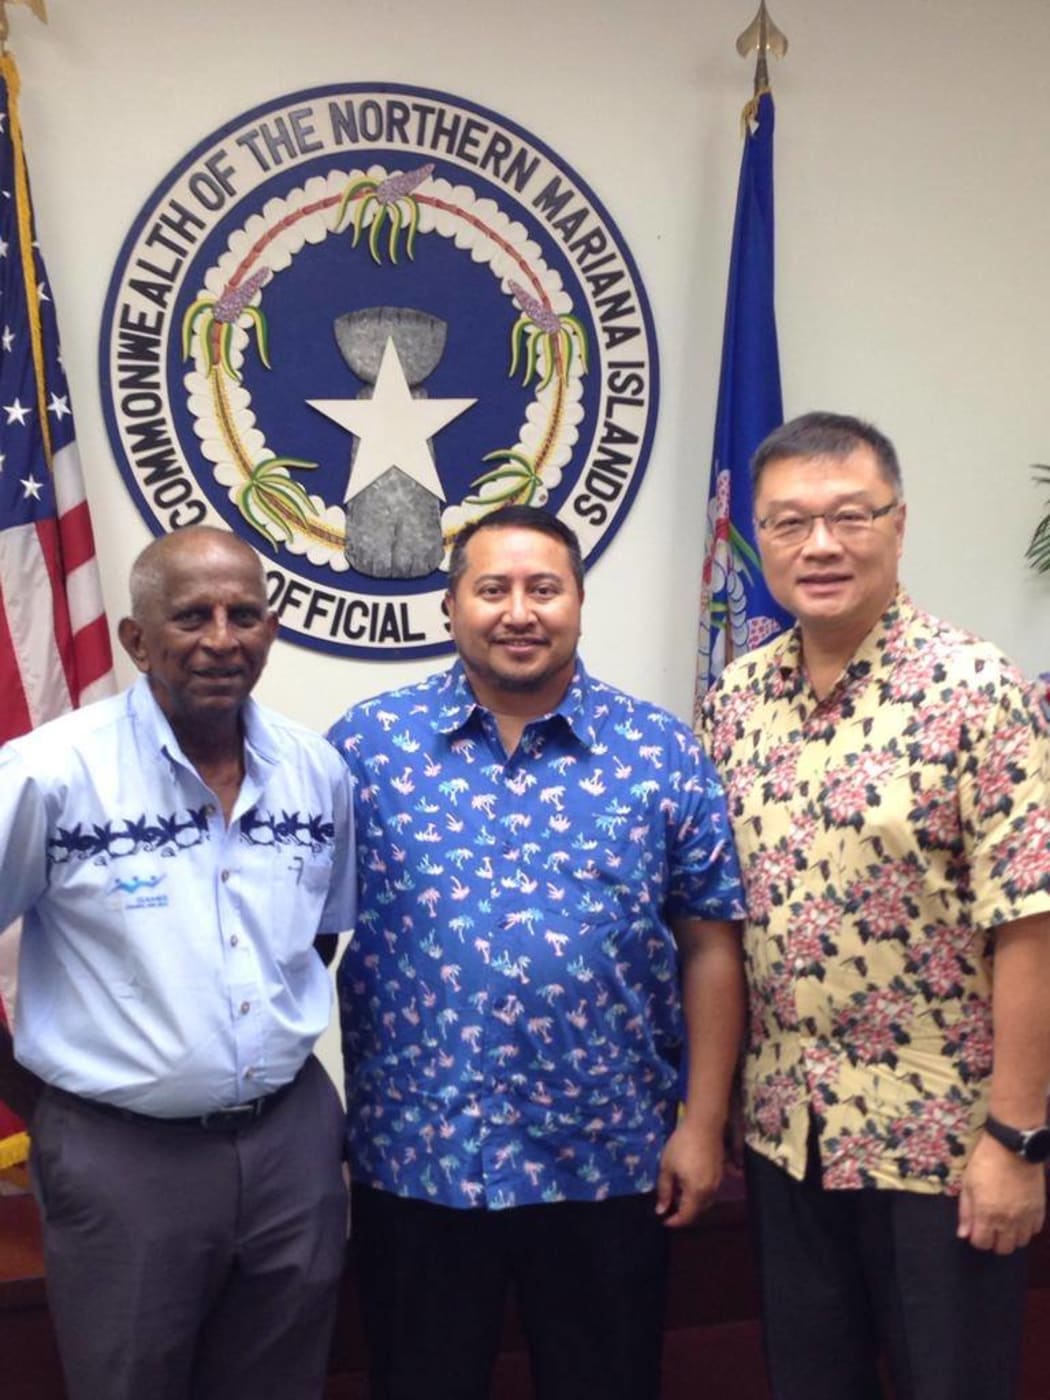 Pacific Games Council President Vidhya Lakhan, CNMI Governor Ralph Torres and Northern Marianas Sports Association President Jerry Tan in February.